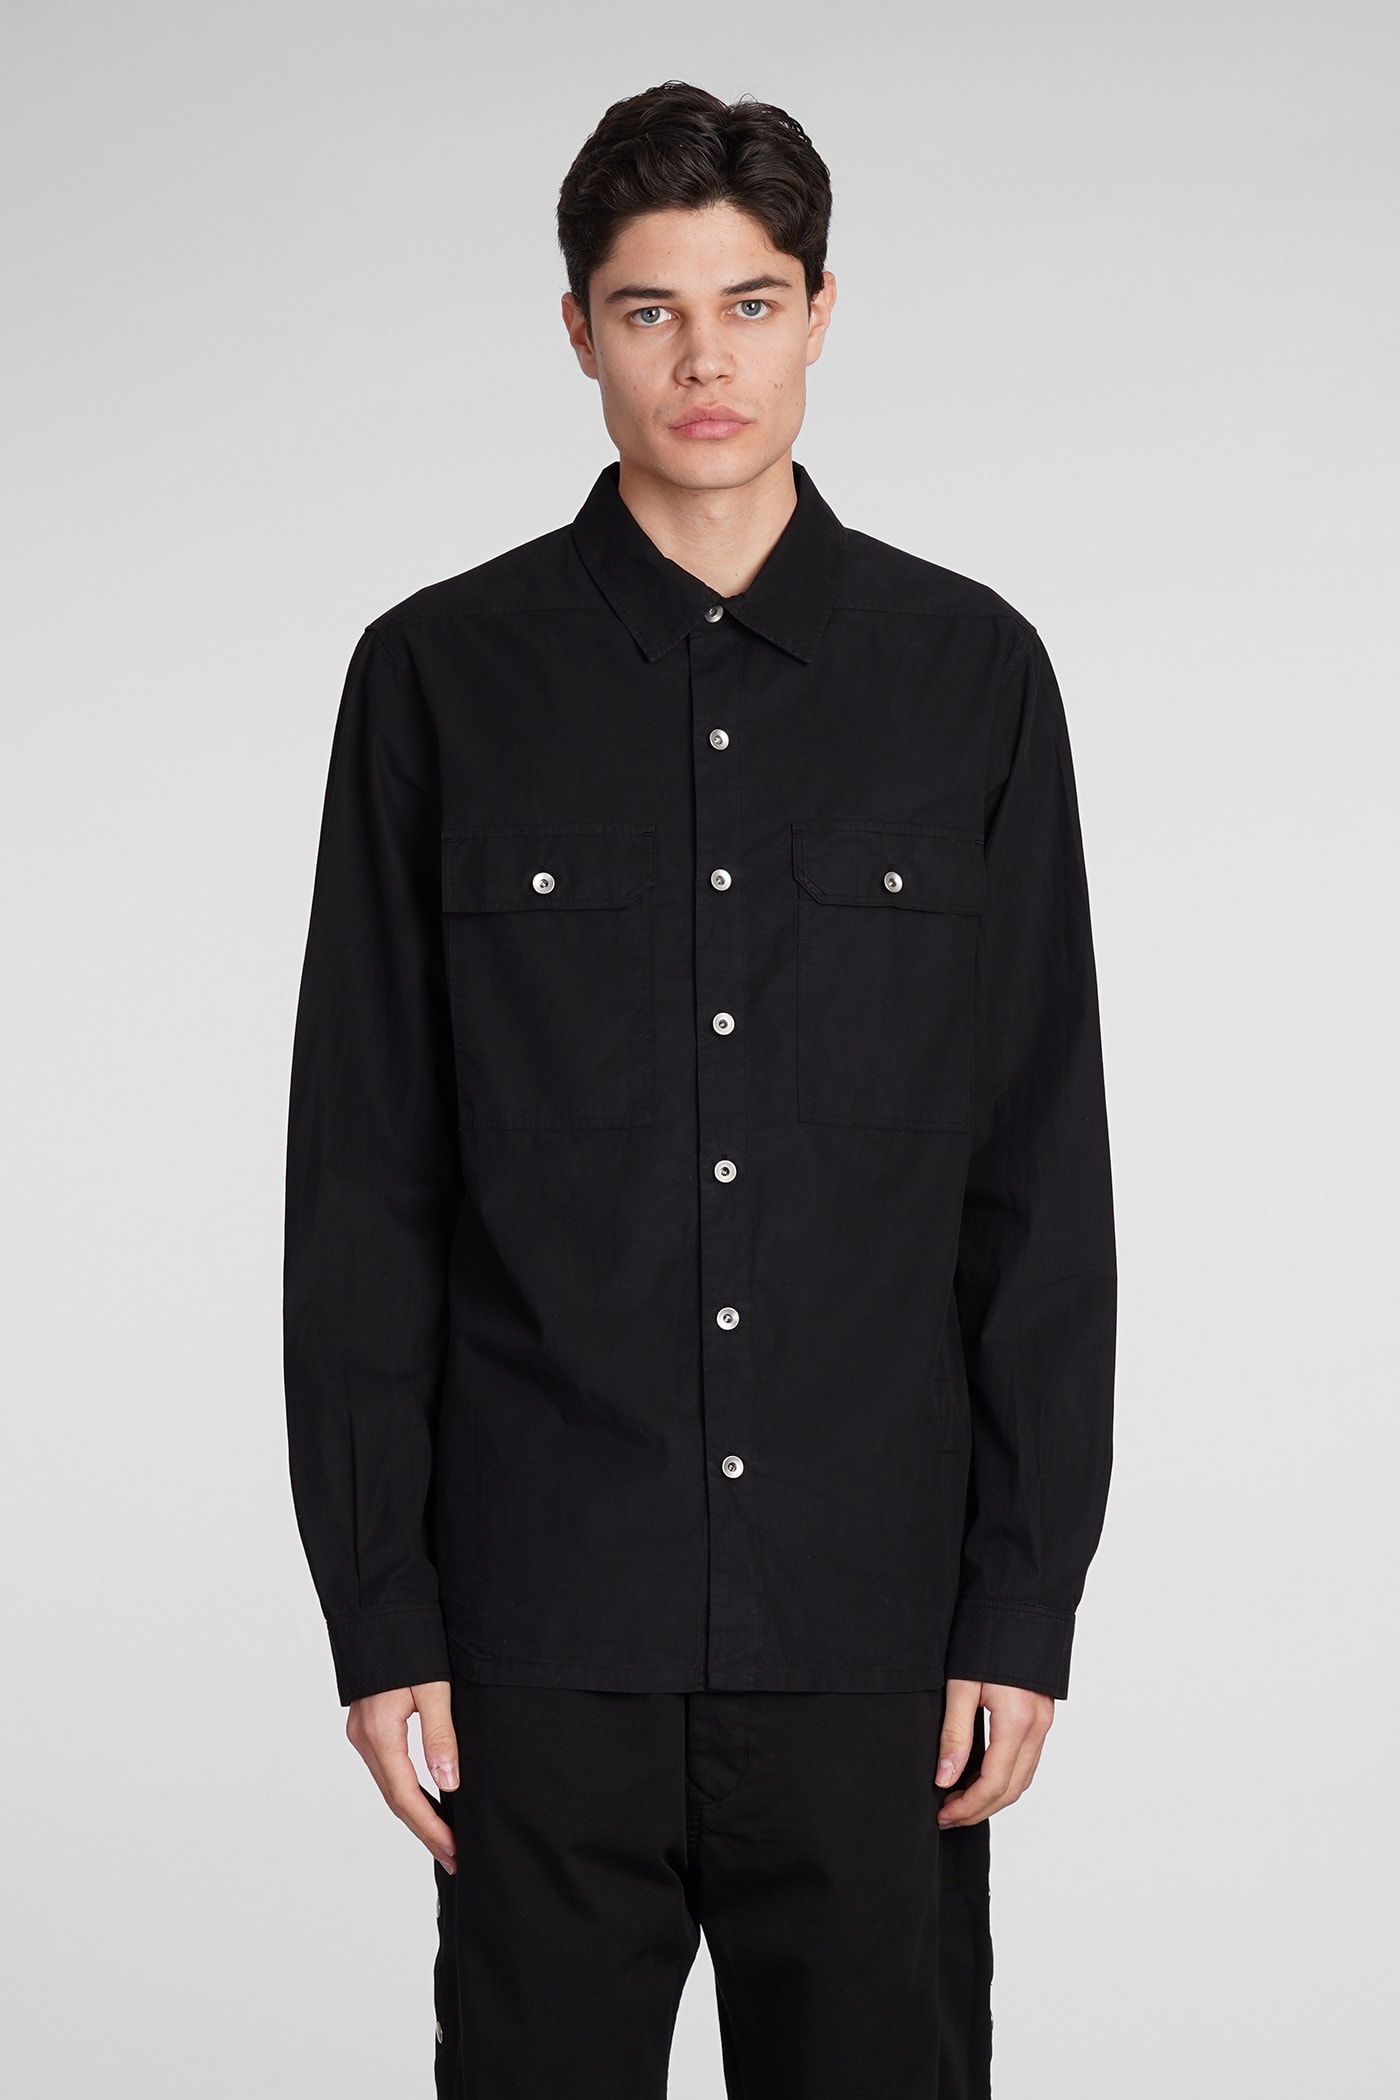 DRKSHDW OUTERSHIRT SHIRT IN BLACK COTTON